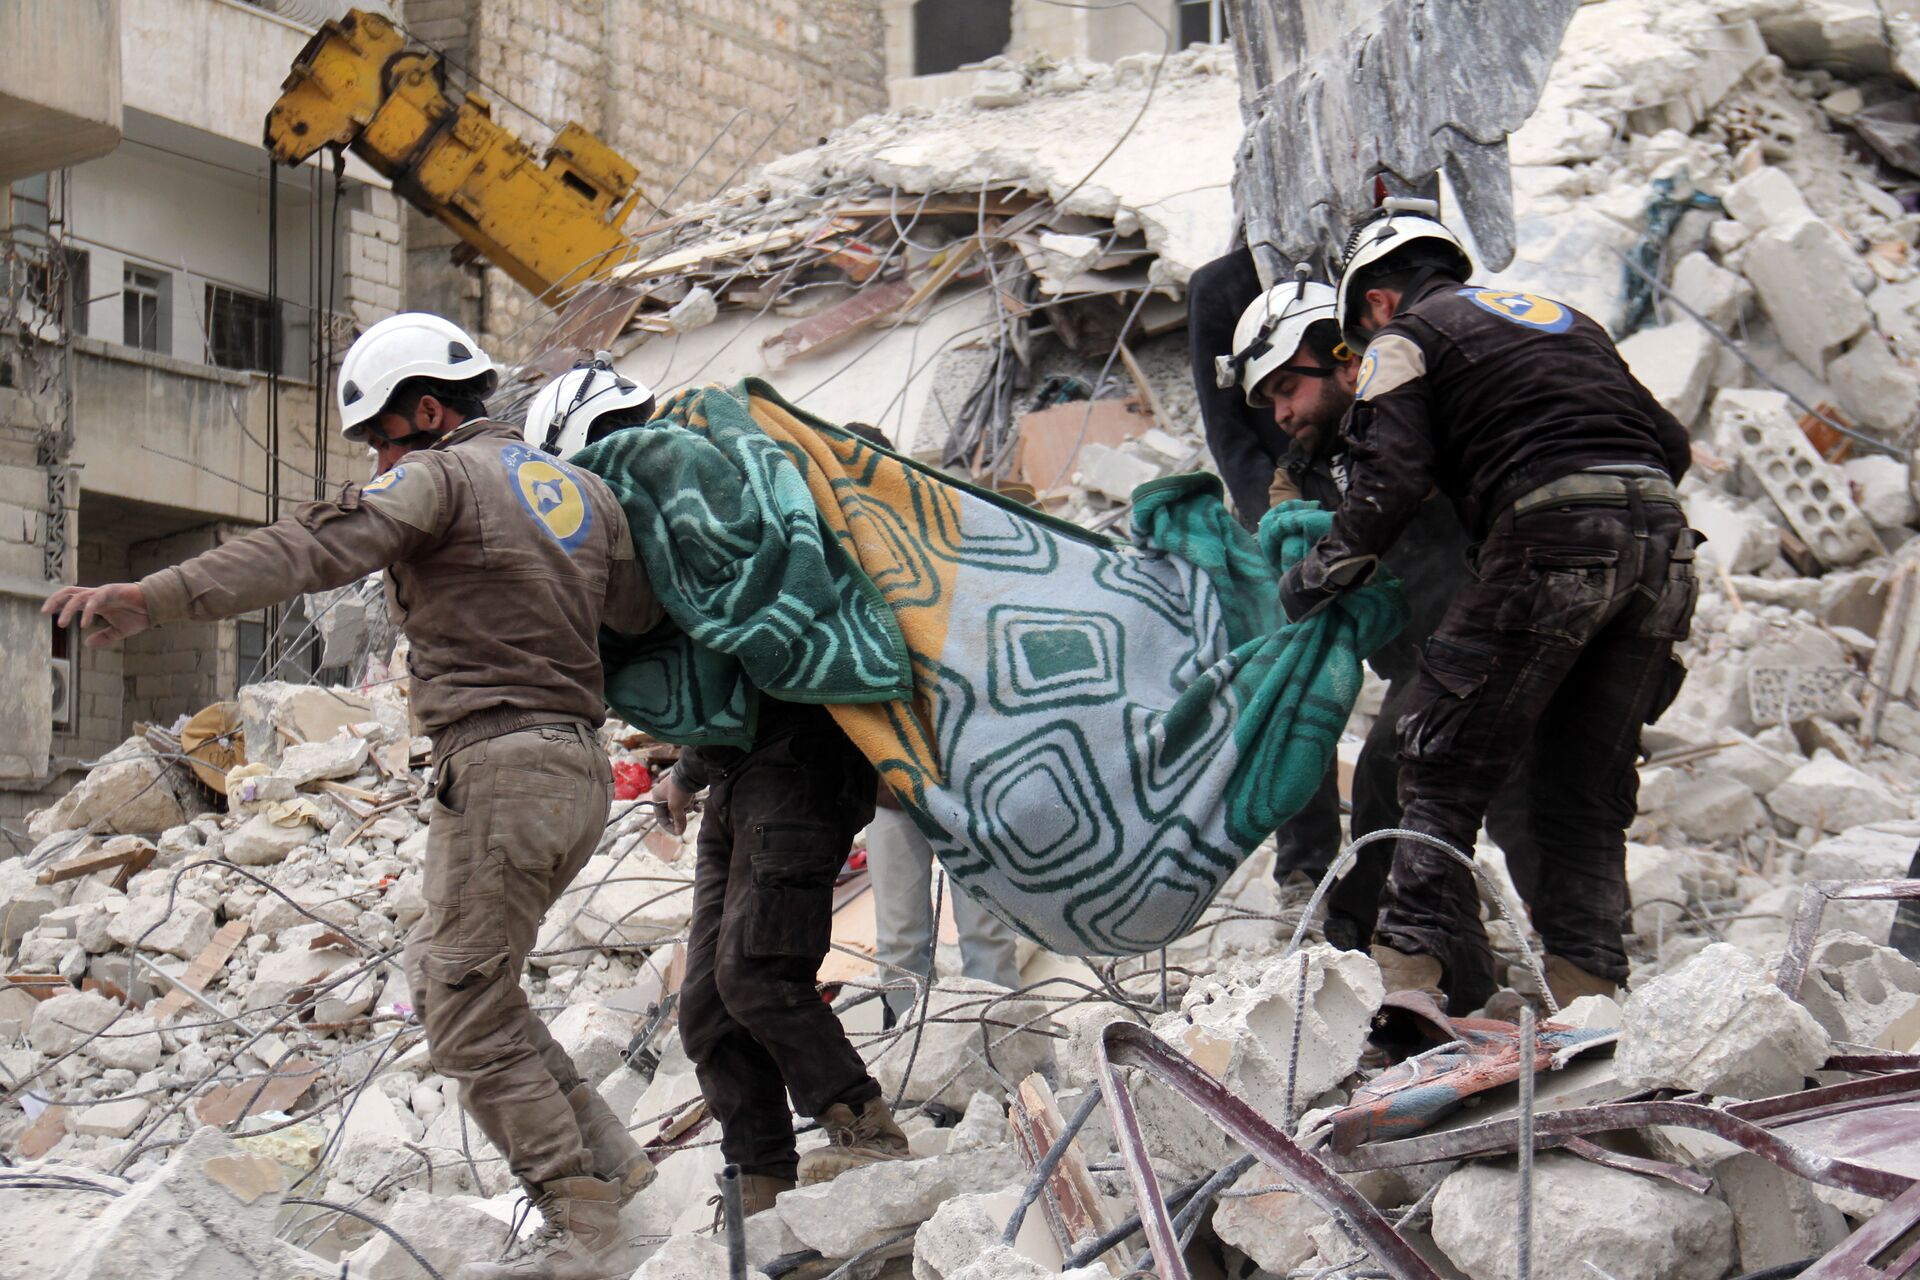 Syrian civil defence volunteers, known as the White Helmets, carry a body retrieved from the rubble following reported government airstrike on the Syrian town of Ariha, in the northwestern province of Idlib, on February 27, 2017 - Sputnik International, 1920, 15.04.2022